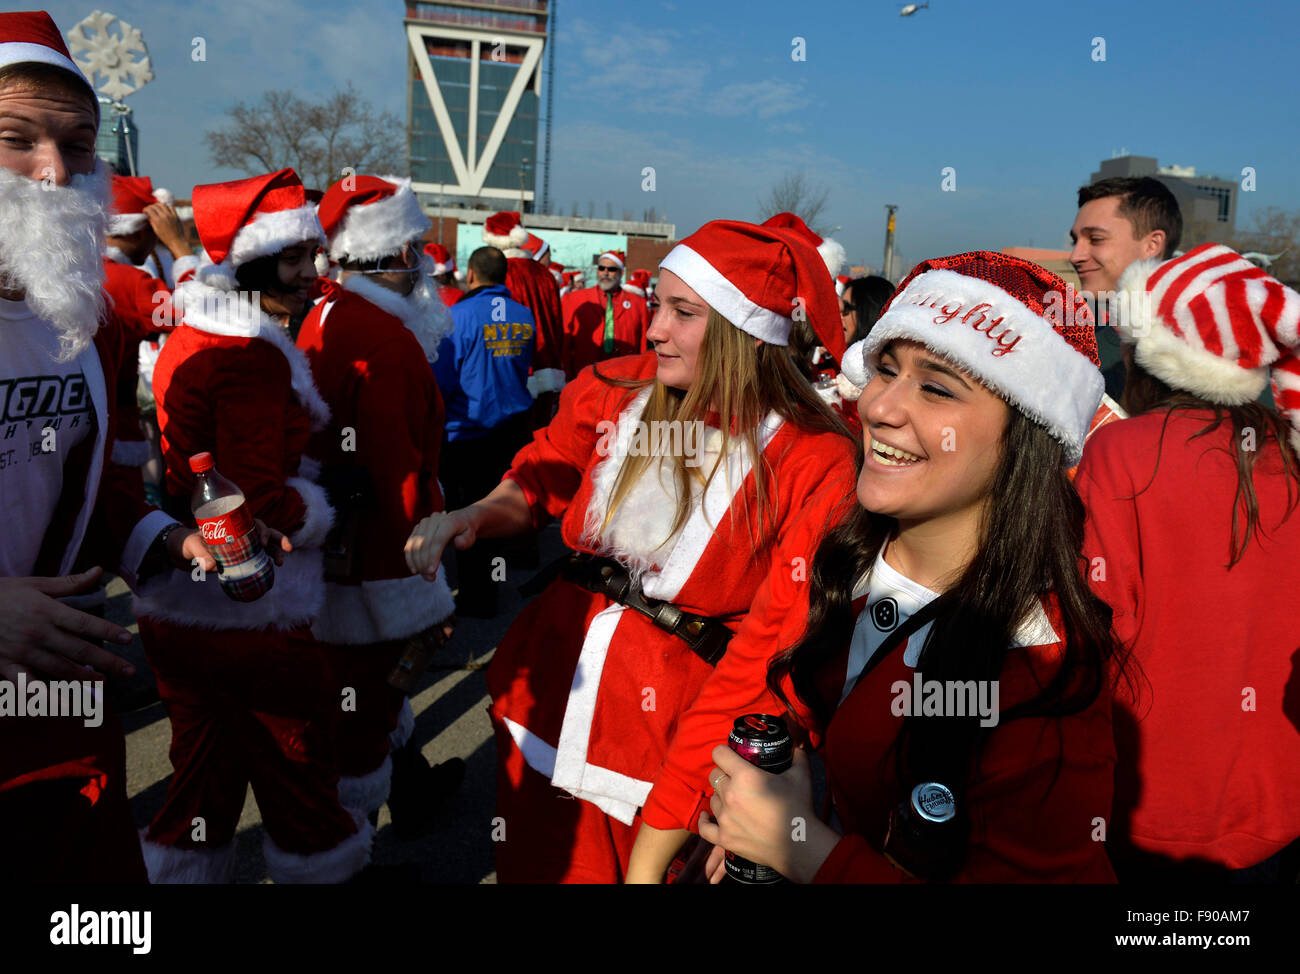 New York, USA. 12th Dec, 2015. People dressed as Santa Claus take part in SantaCon 2015 in New York, the United States, on Dec. 12, 2015. SantaCon 2015 kicked off Saturday here in New York. SantaCon, a celebration that calls for attendees to dress as Santas and follow a pre-planned route of bar-hopping, is celebrated in cities across the U.S. and the world. Credit:  Wang Lei/Xinhua/Alamy Live News Stock Photo